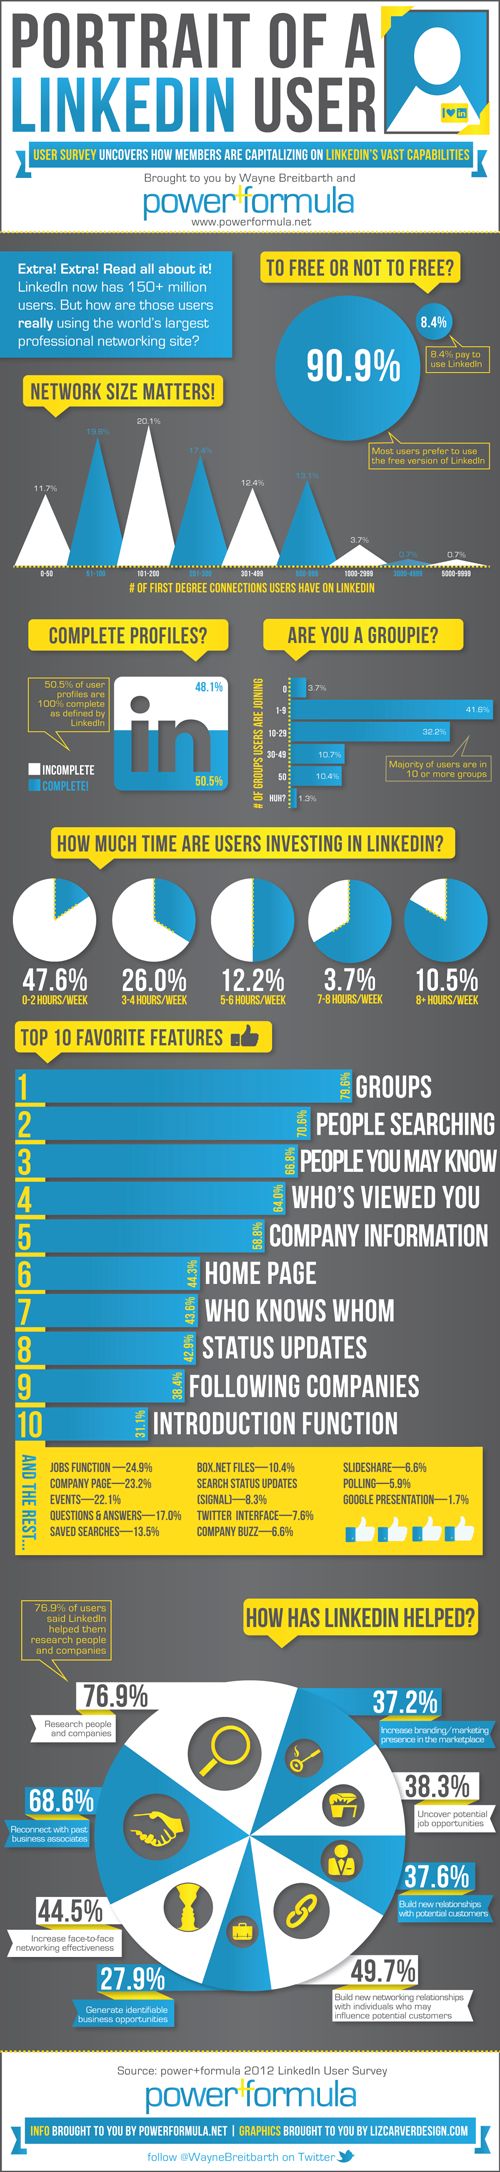 How to Harness the Power of LinkedIn – INFOGRAPHIC